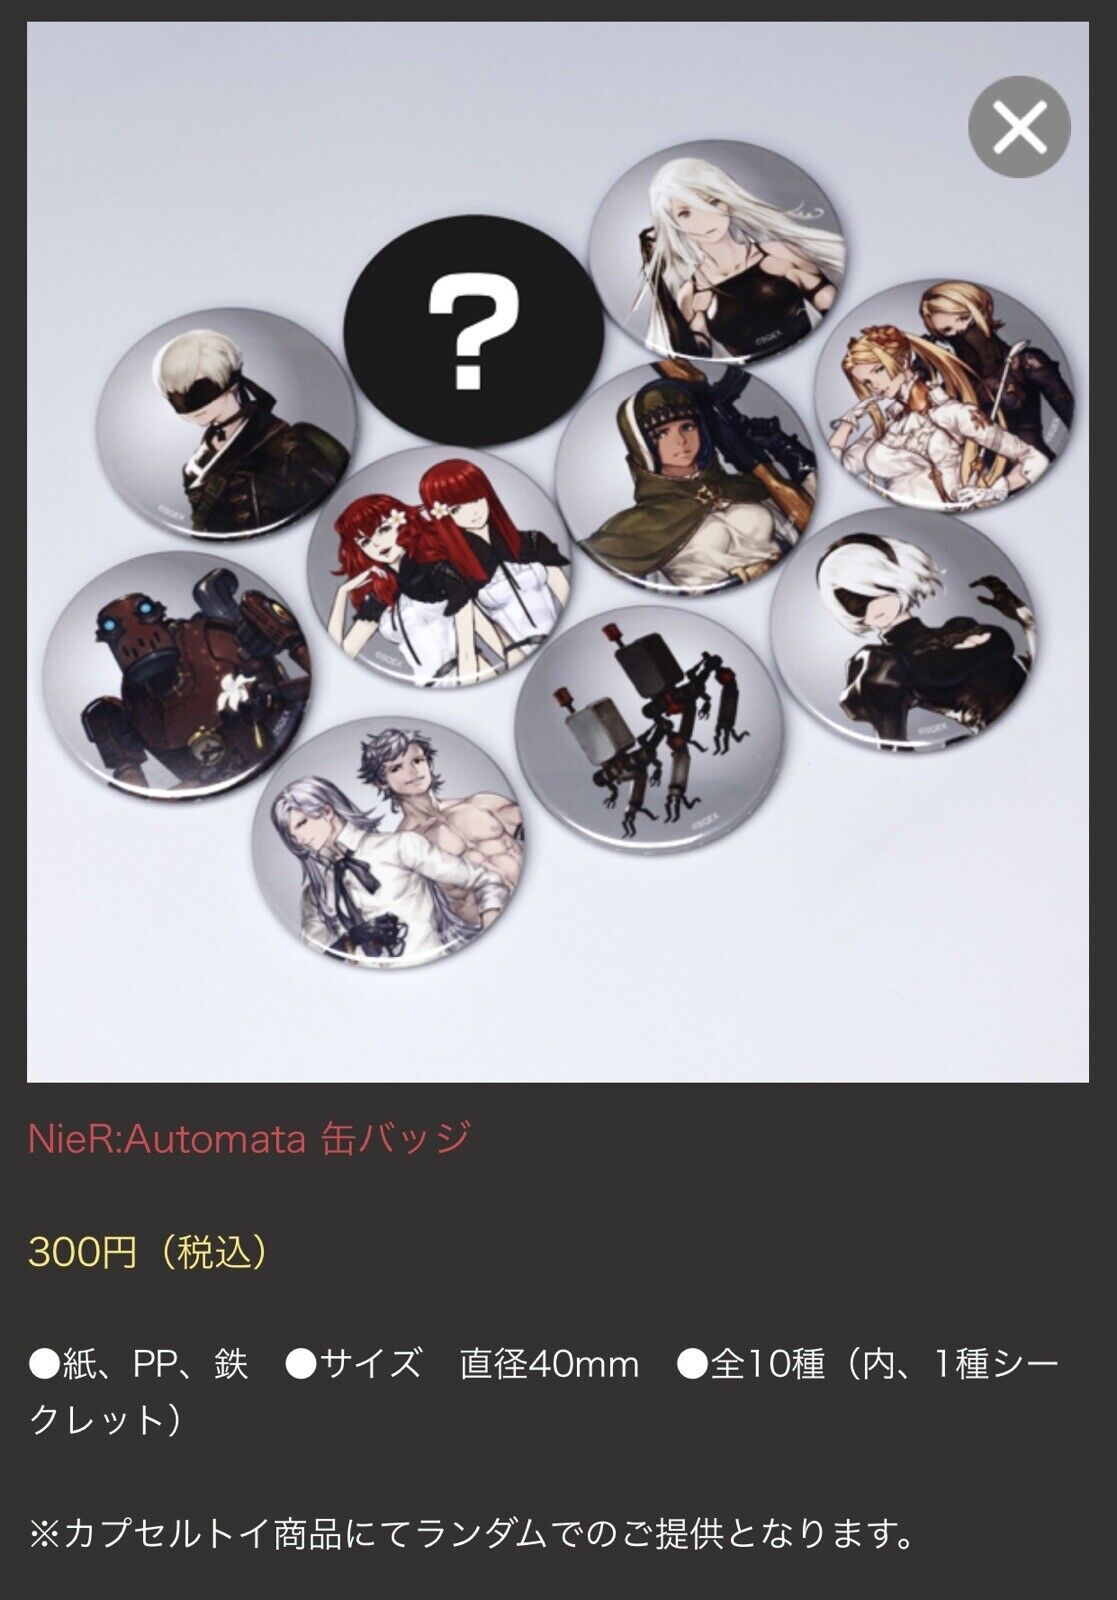 Sqaure Enix Cafe Nier Automata Can Badge 10 Types Complete